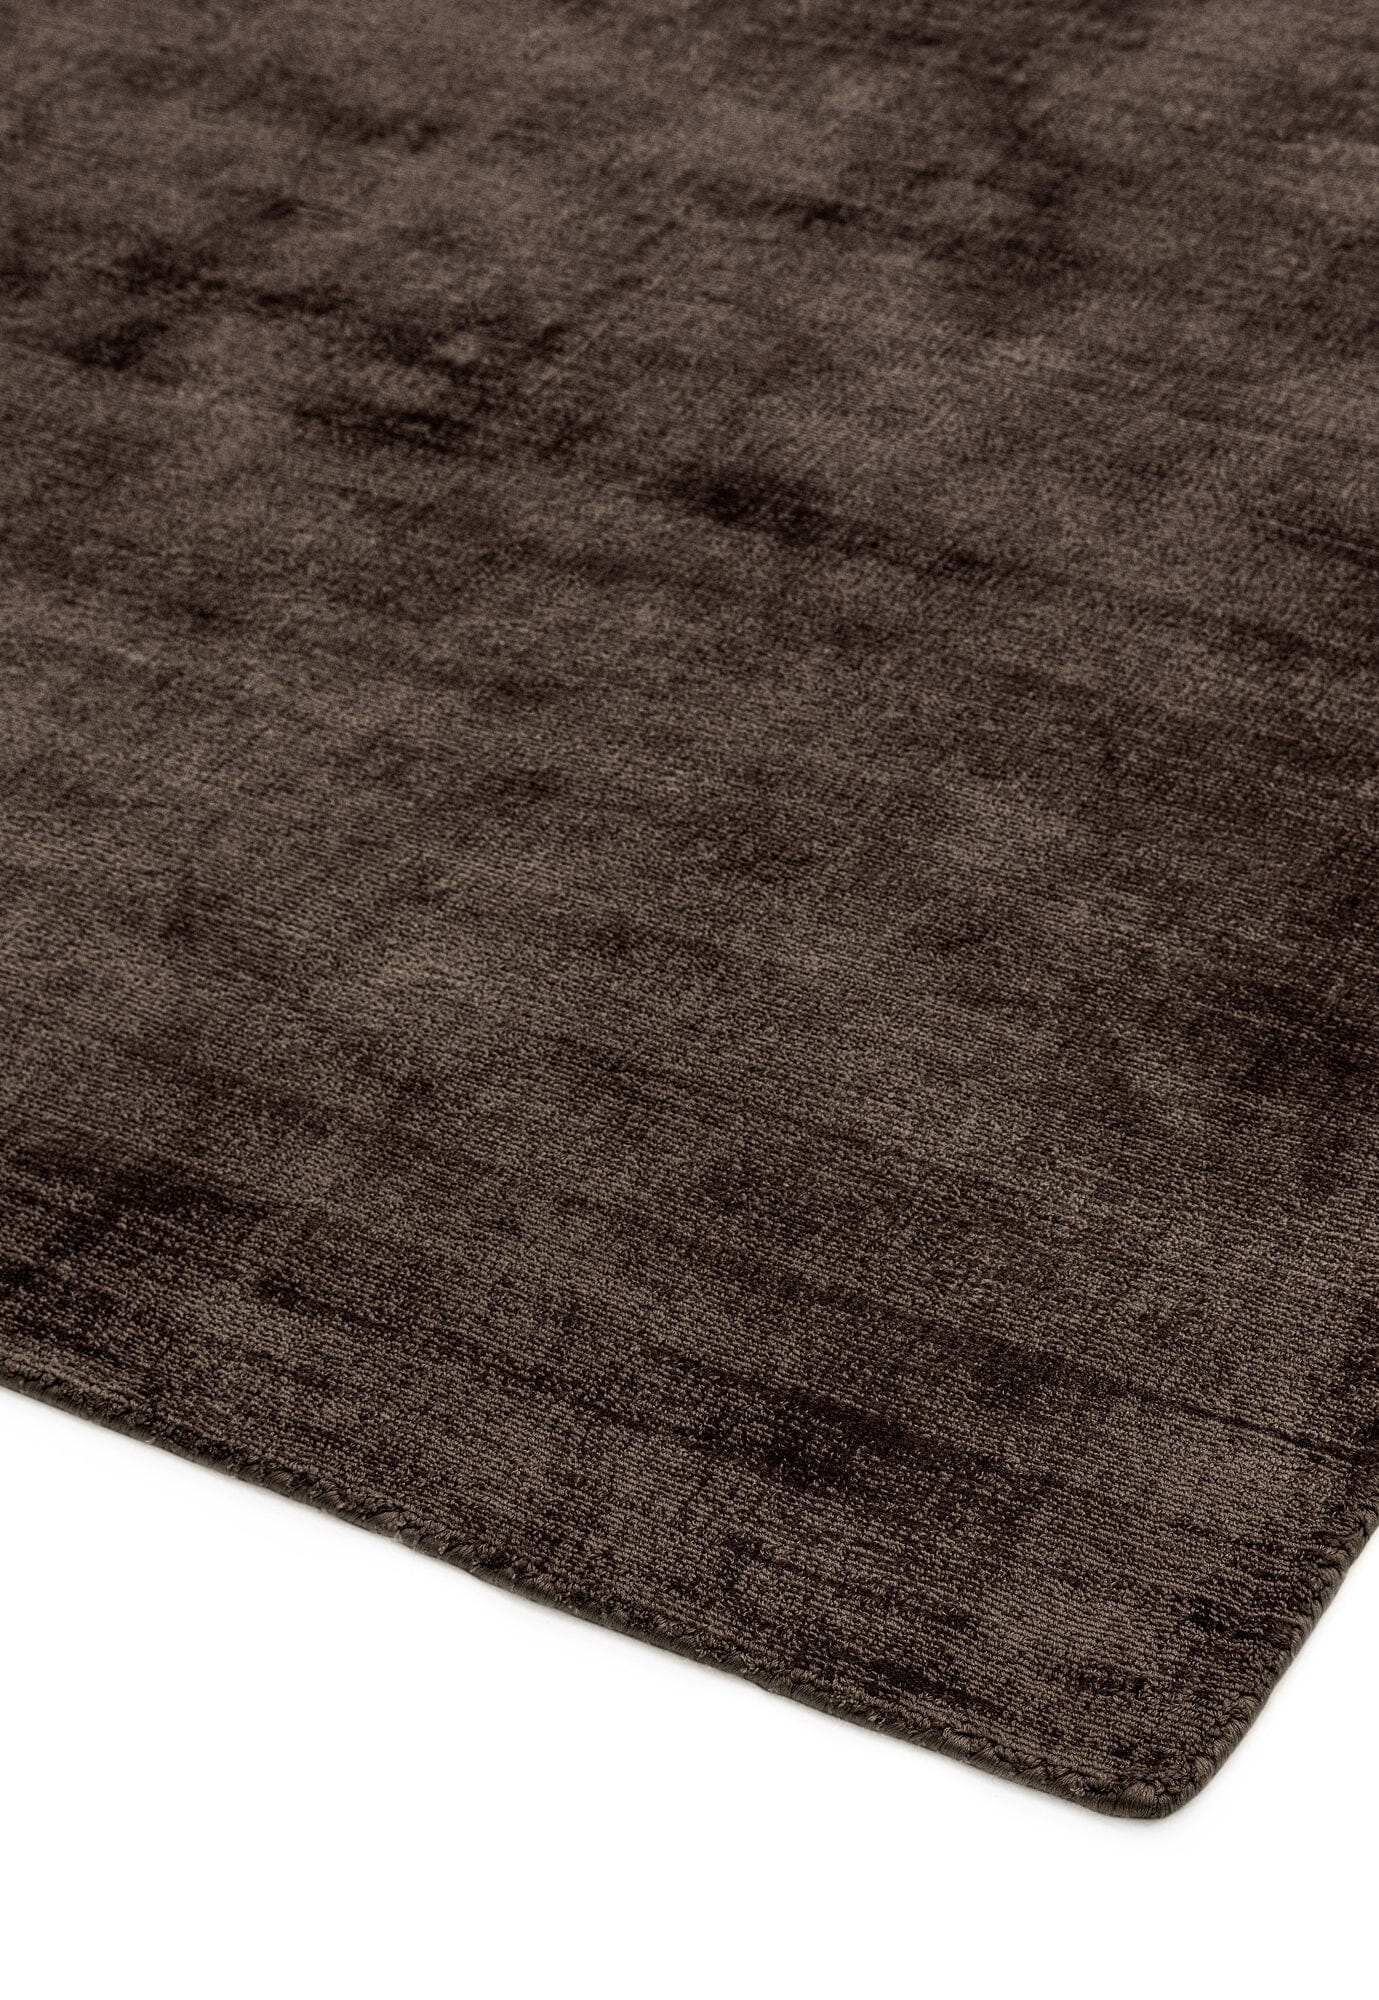  Asiatic Carpets-Asiatic Carpets Blade Hand Woven Rug Chocolate - 160 x 230cm-Brown 757 